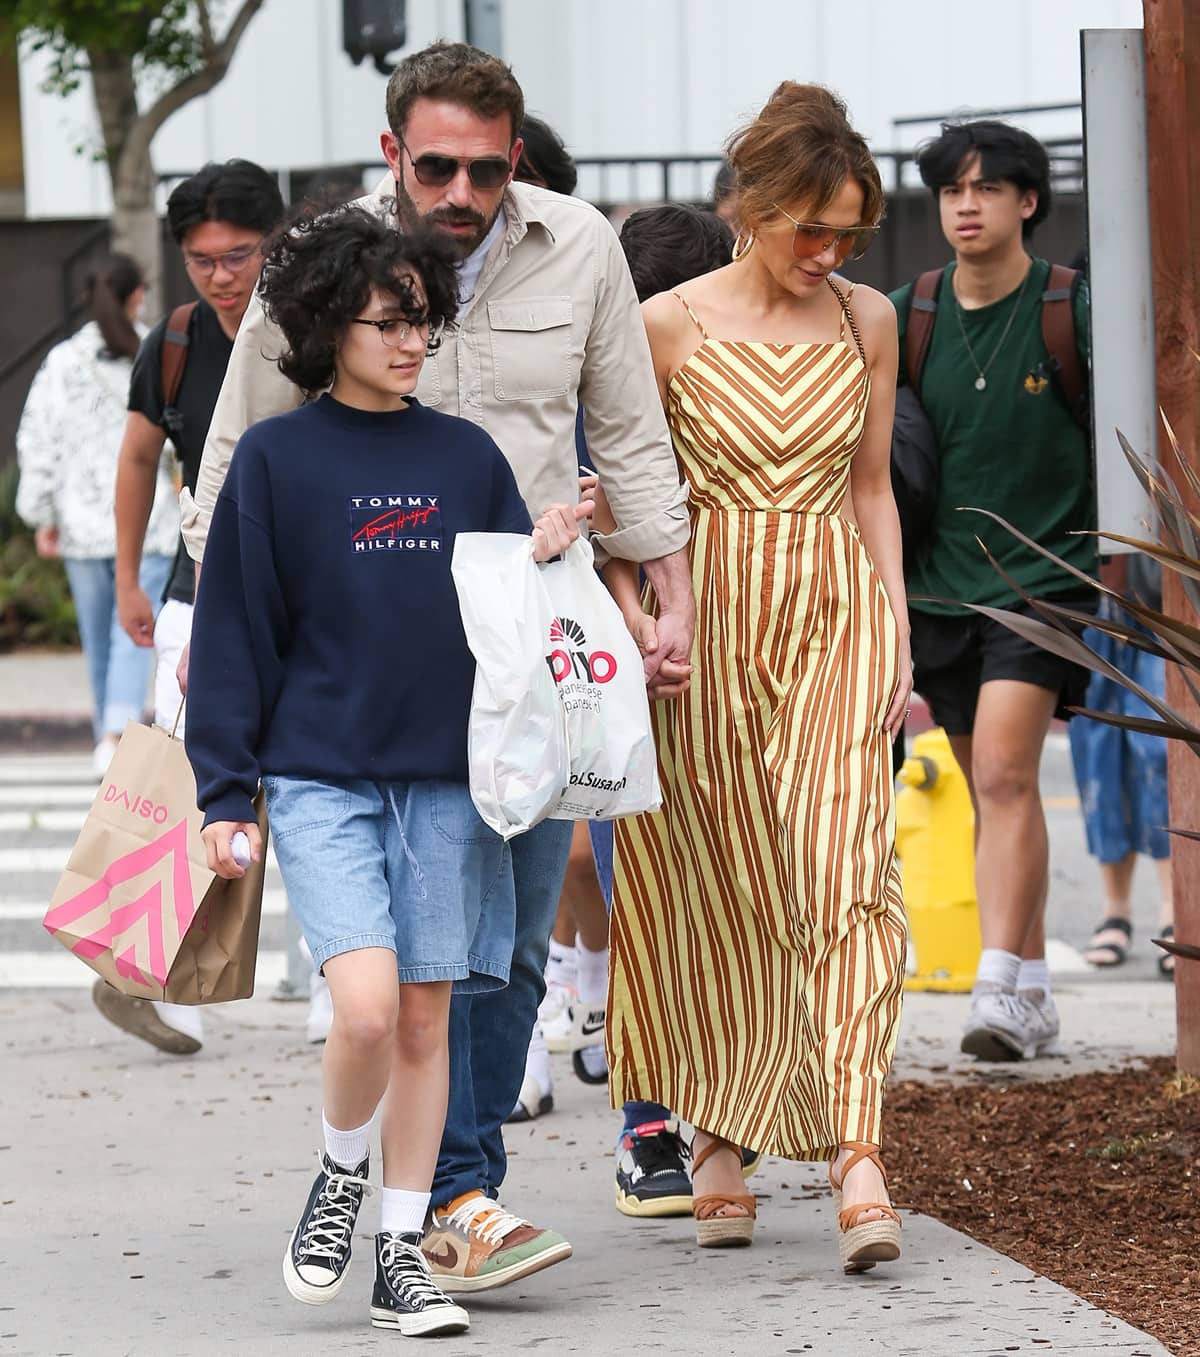 Ben Affleck and Jennifer Lopez held hands during a stroll and were s accompanied by Jennifer's 15-year-old child, Emme Muniz